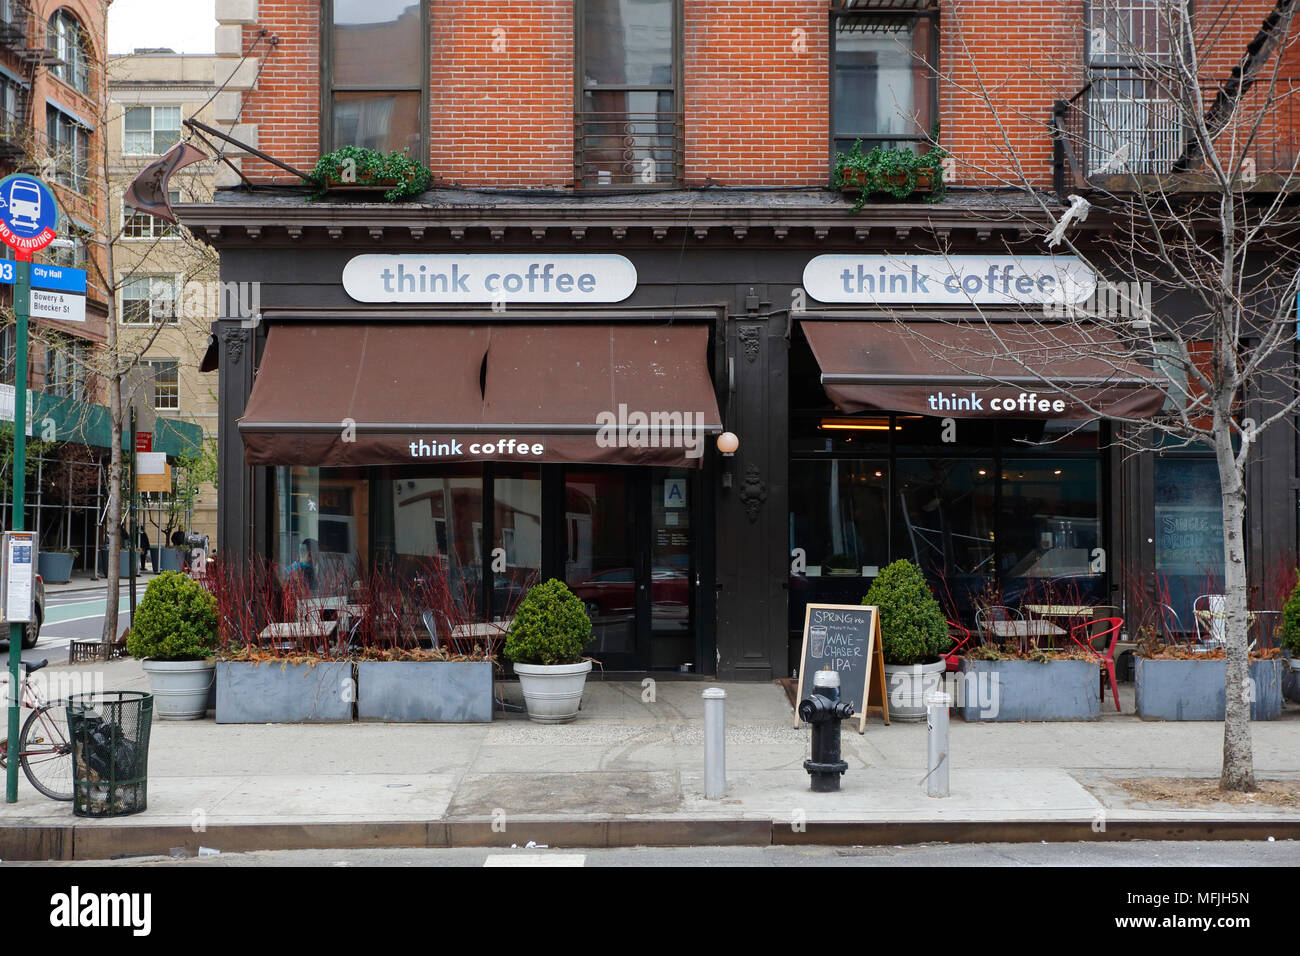 https://c8.alamy.com/comp/MFJH5N/think-coffee-1-bleecker-st-new-york-ny-exterior-storefront-of-a-coffee-shop-and-sidewalk-cafe-in-the-east-village-neighborhood-of-manhattan-MFJH5N.jpg